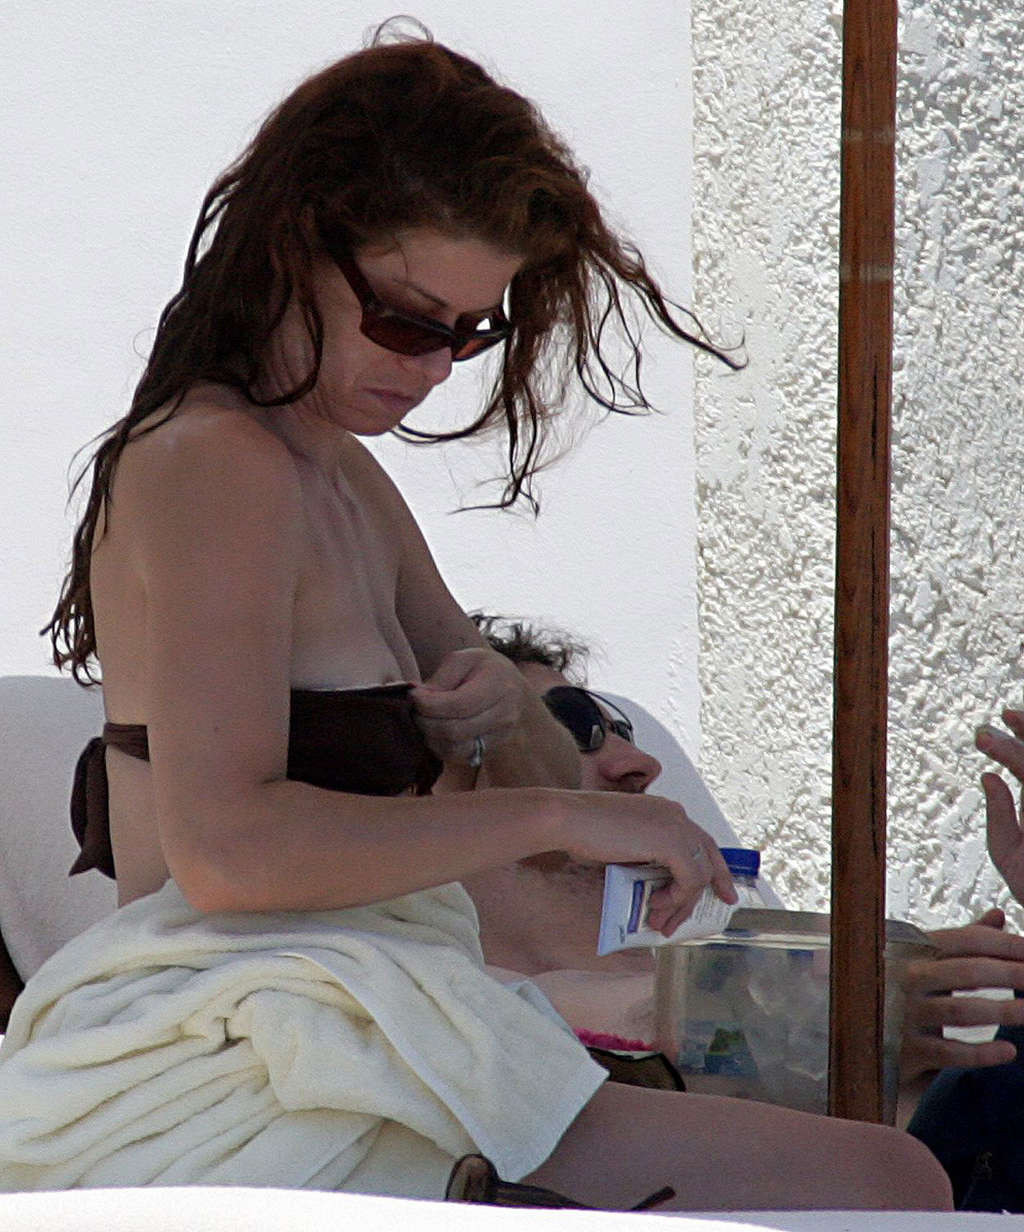 Debra Messing nipple slip on beach paparazzi pictures and posing nude #75372293